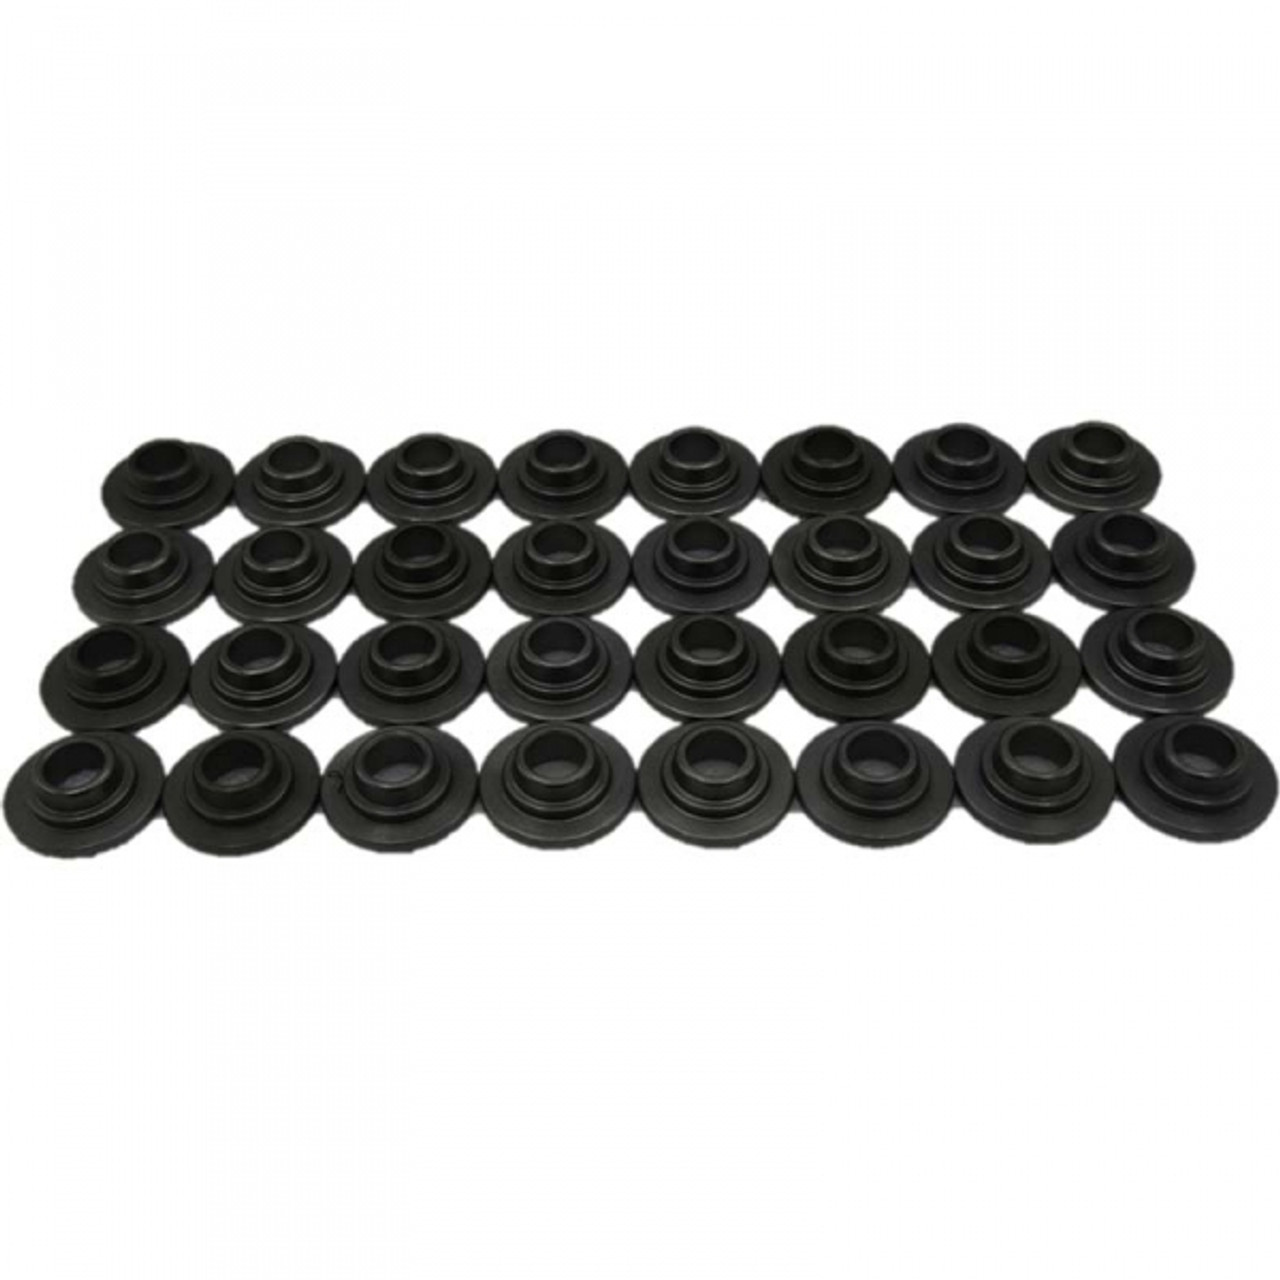 Powerstroke Products Heavy Duty Valve Spring Retainers 2003 to 2010 6.0L/6.4L Powerstroke (PP-HDVSR)-Main View